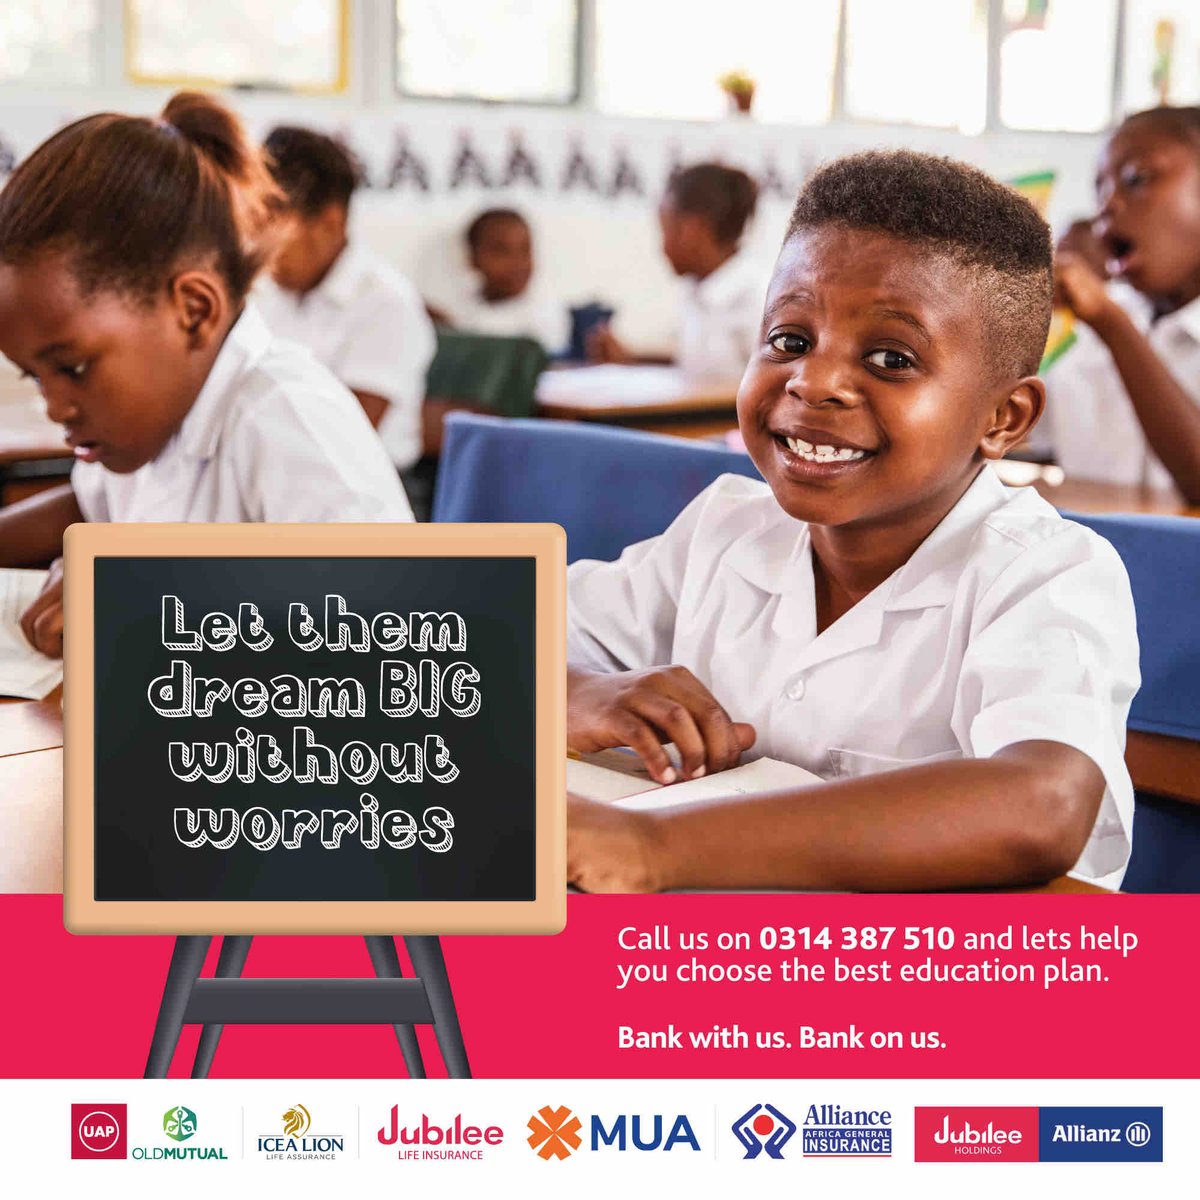 We understand the pressure and stress to provide education for your children.
 
Cure the back to school headache by signing up for an Education Insurance Plan.
 
Our insurance agents are ready to serve you call 0314 387 510 for details.
#BankWithUsBankOnUs